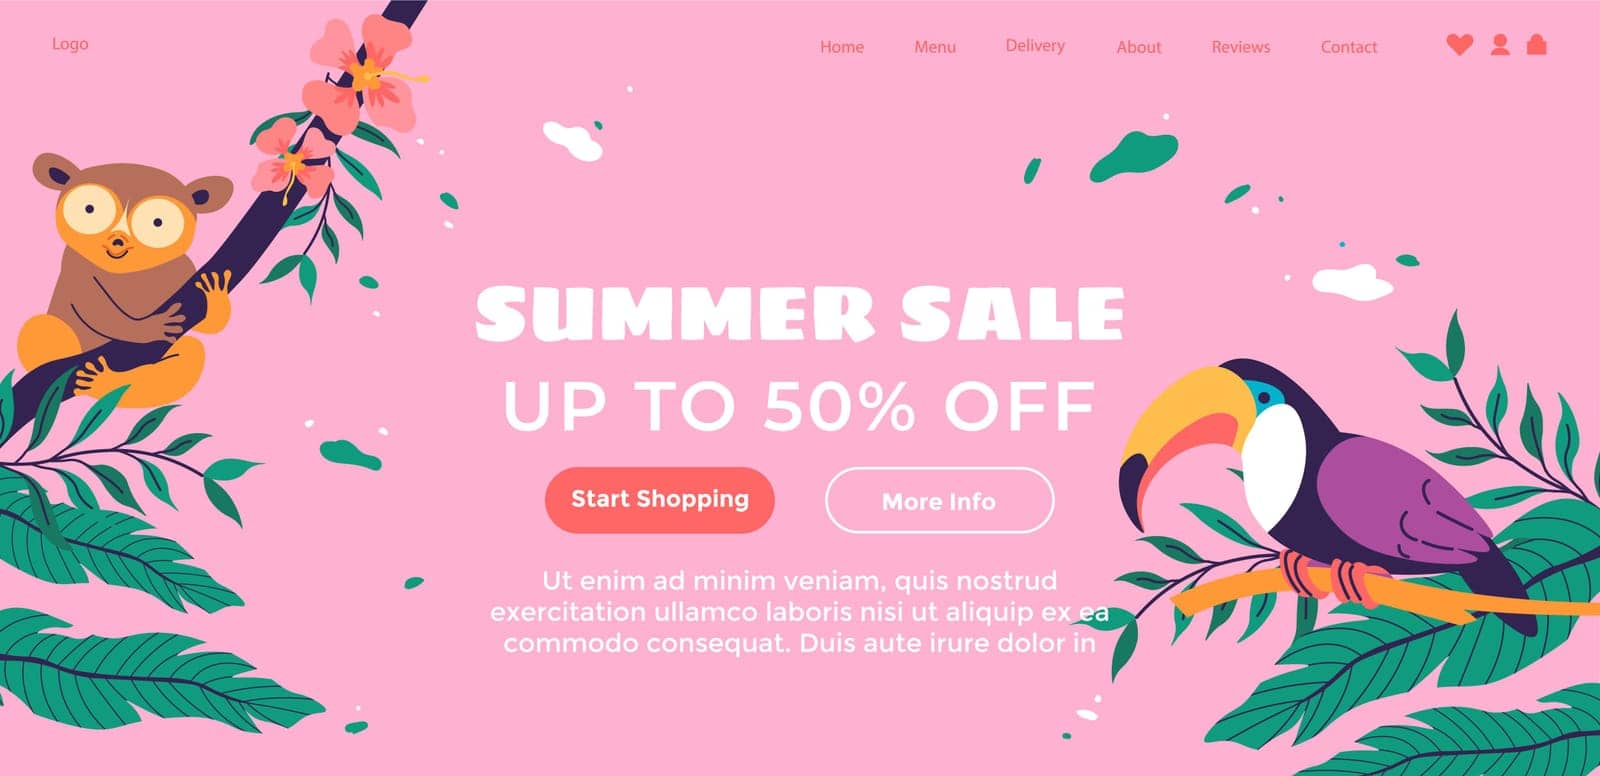 Sale and discounts on products in summer, seasonal reduction of price. Star shopping and get best products and items discounted. Website landing page, internet page template. Vector in flat style